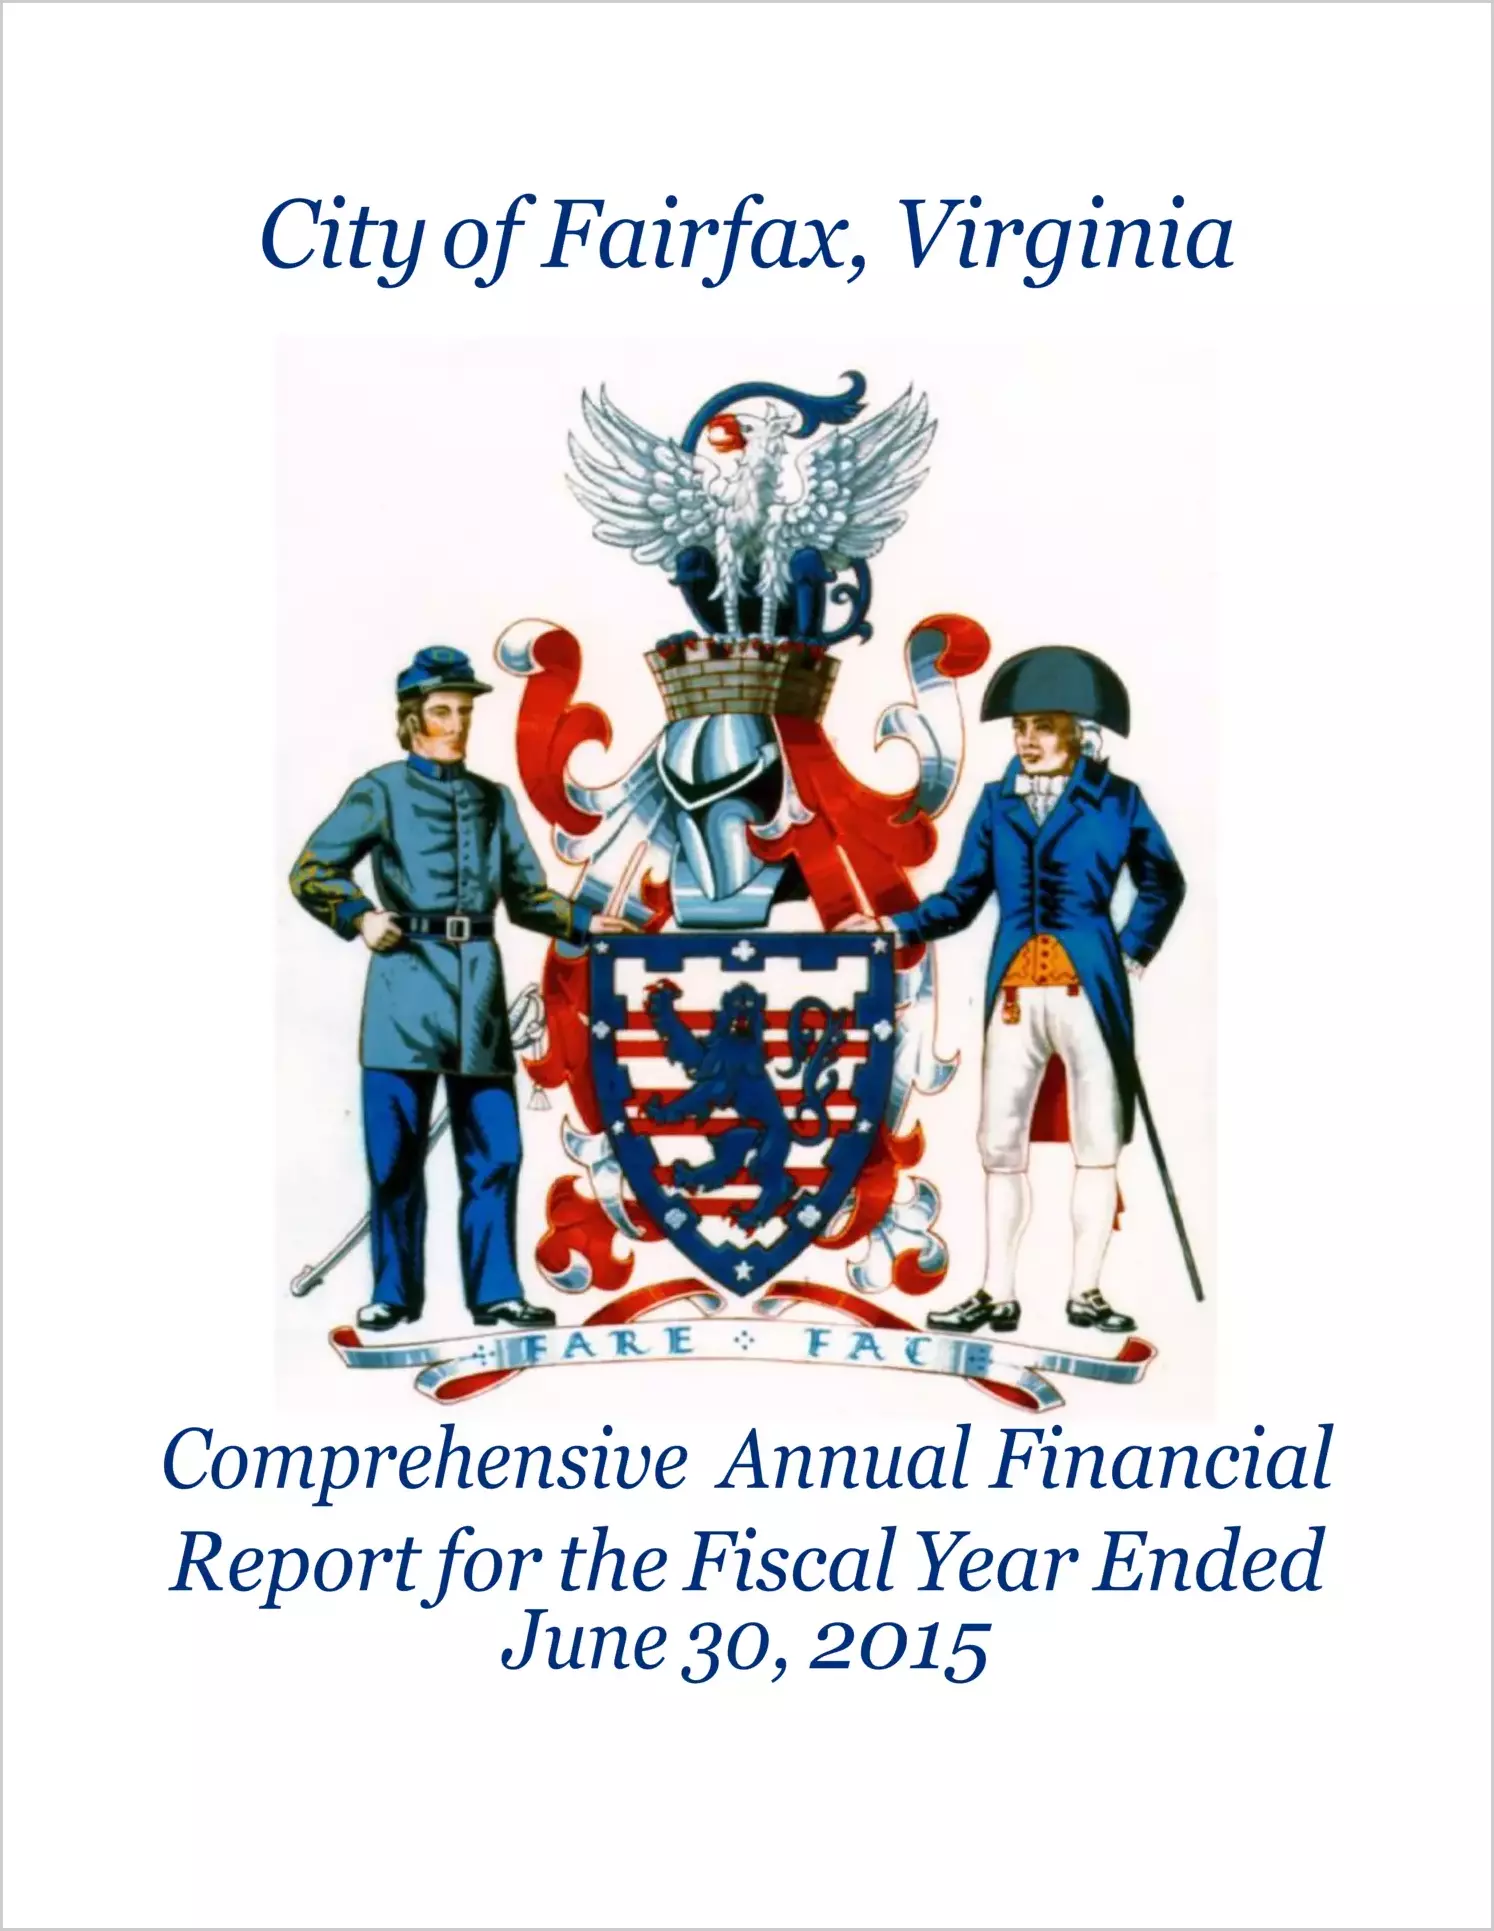 2015 Annual Financial Report for City of Fairfax